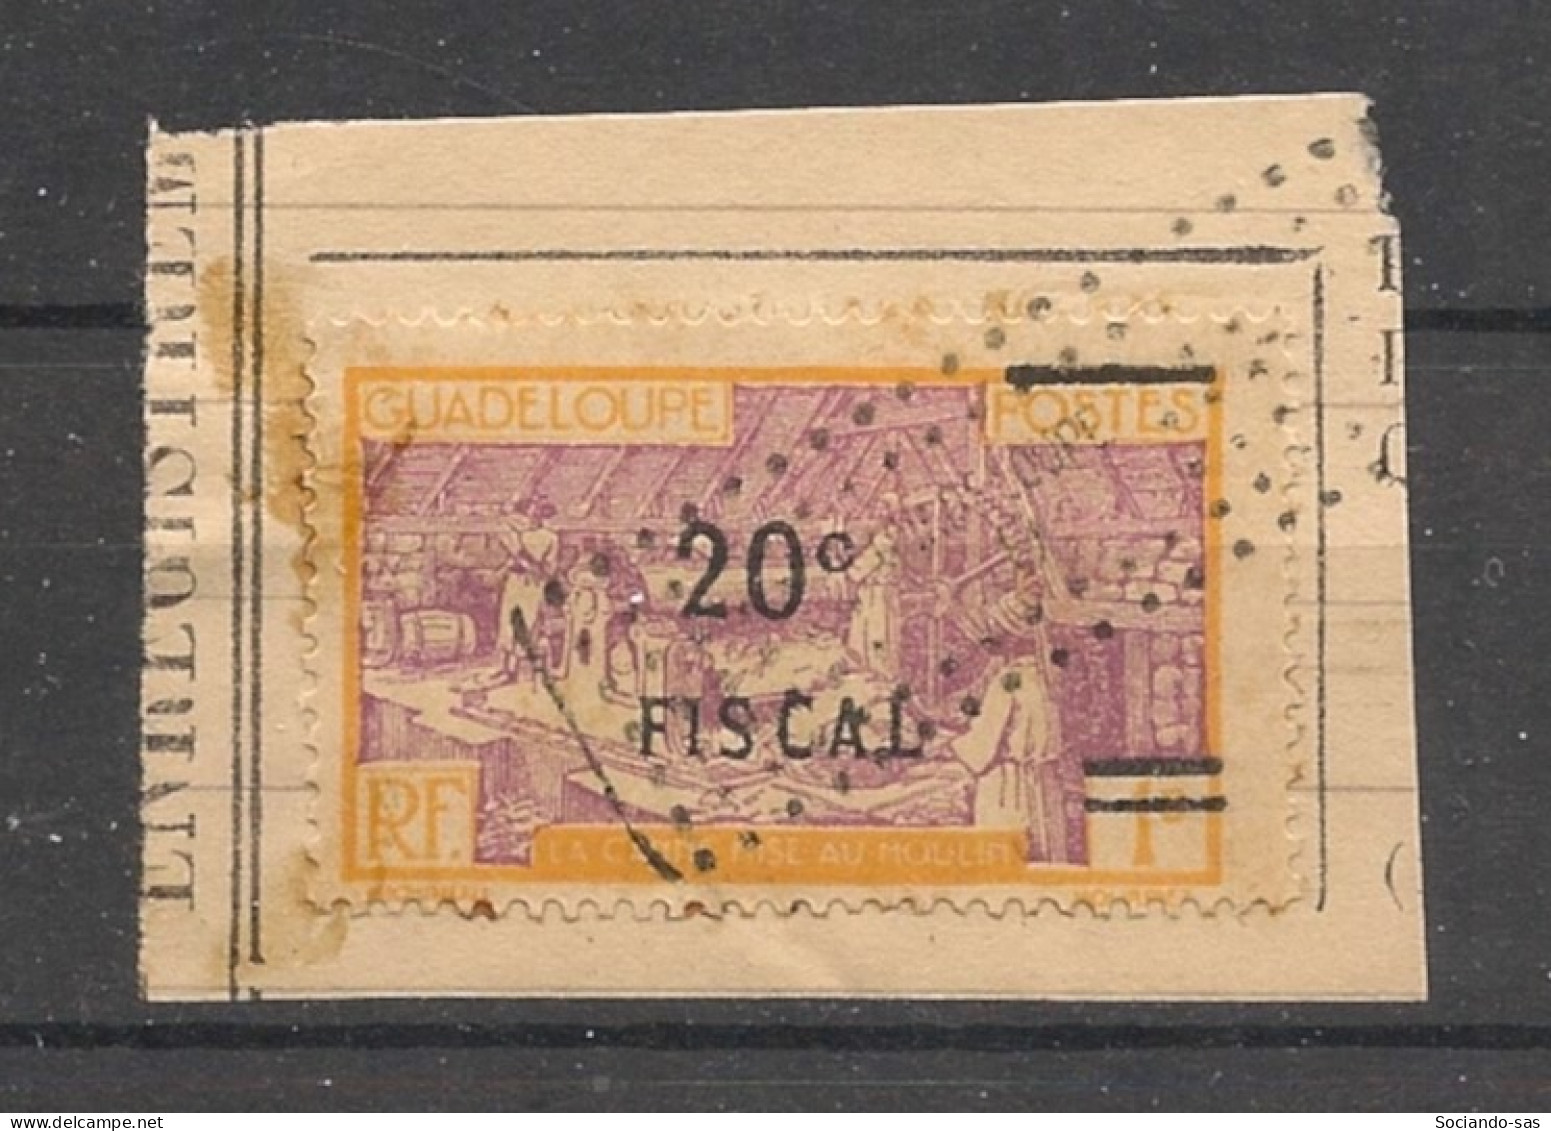 GUADELOUPE - N°YT. 99 - Timbre Fiscal 20c Sur 1c - Oblitéré / Used - Used Stamps